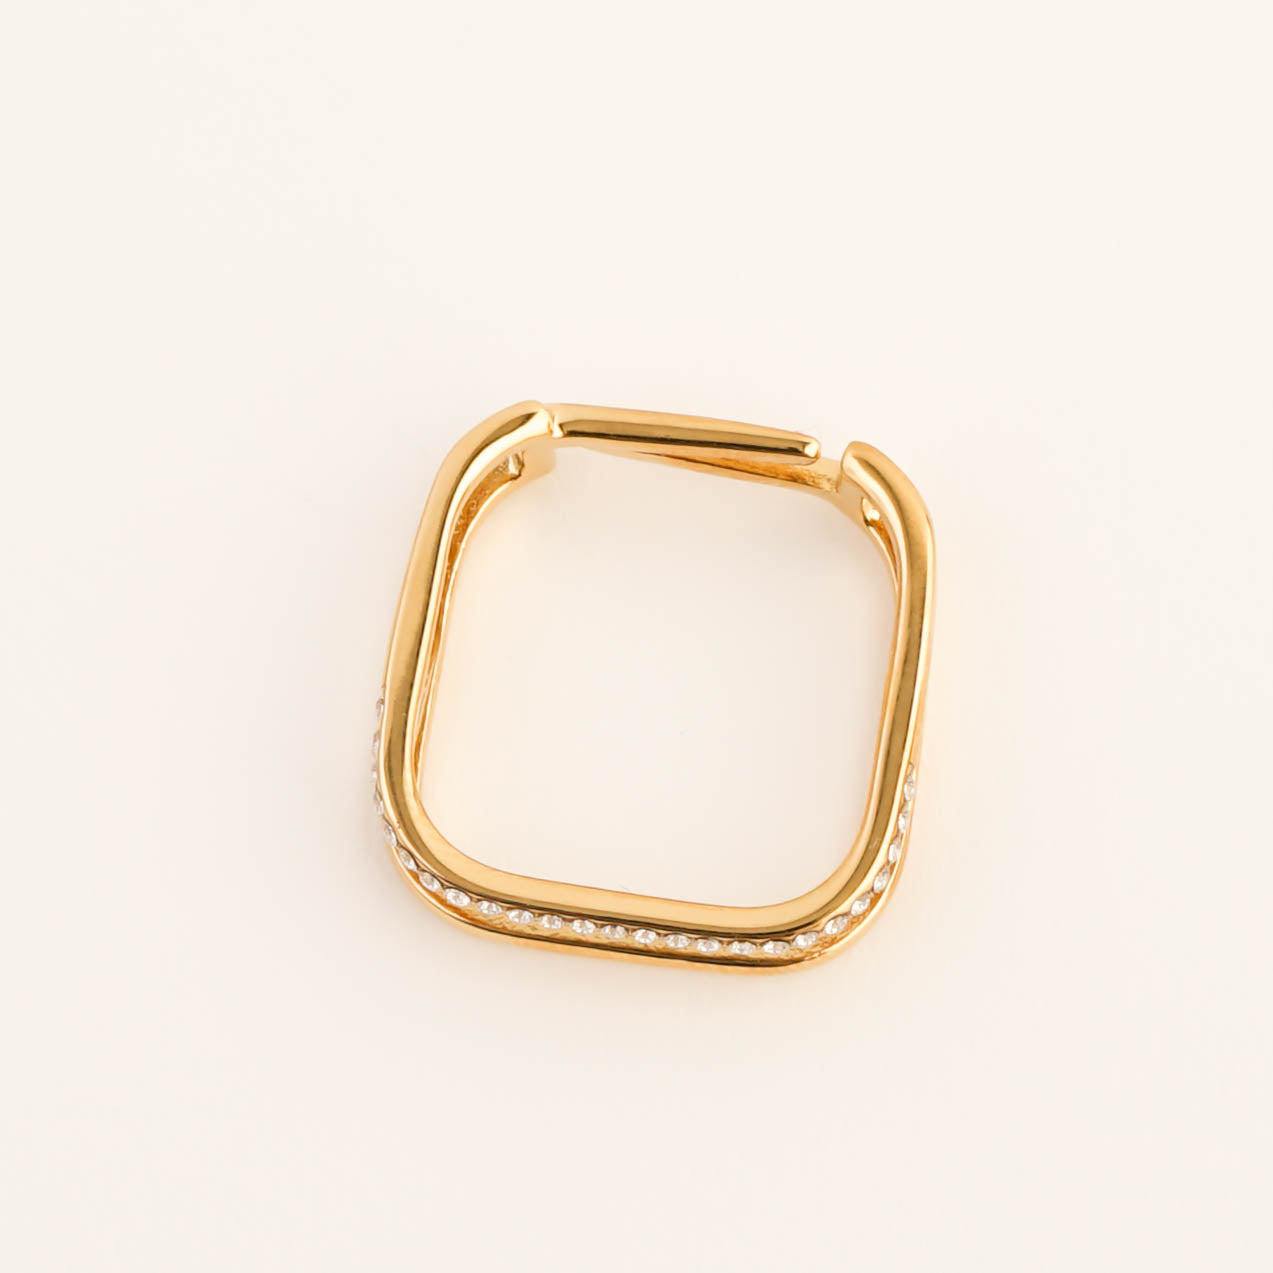 QUIRKY SQUARE ADJUSTABLE RING